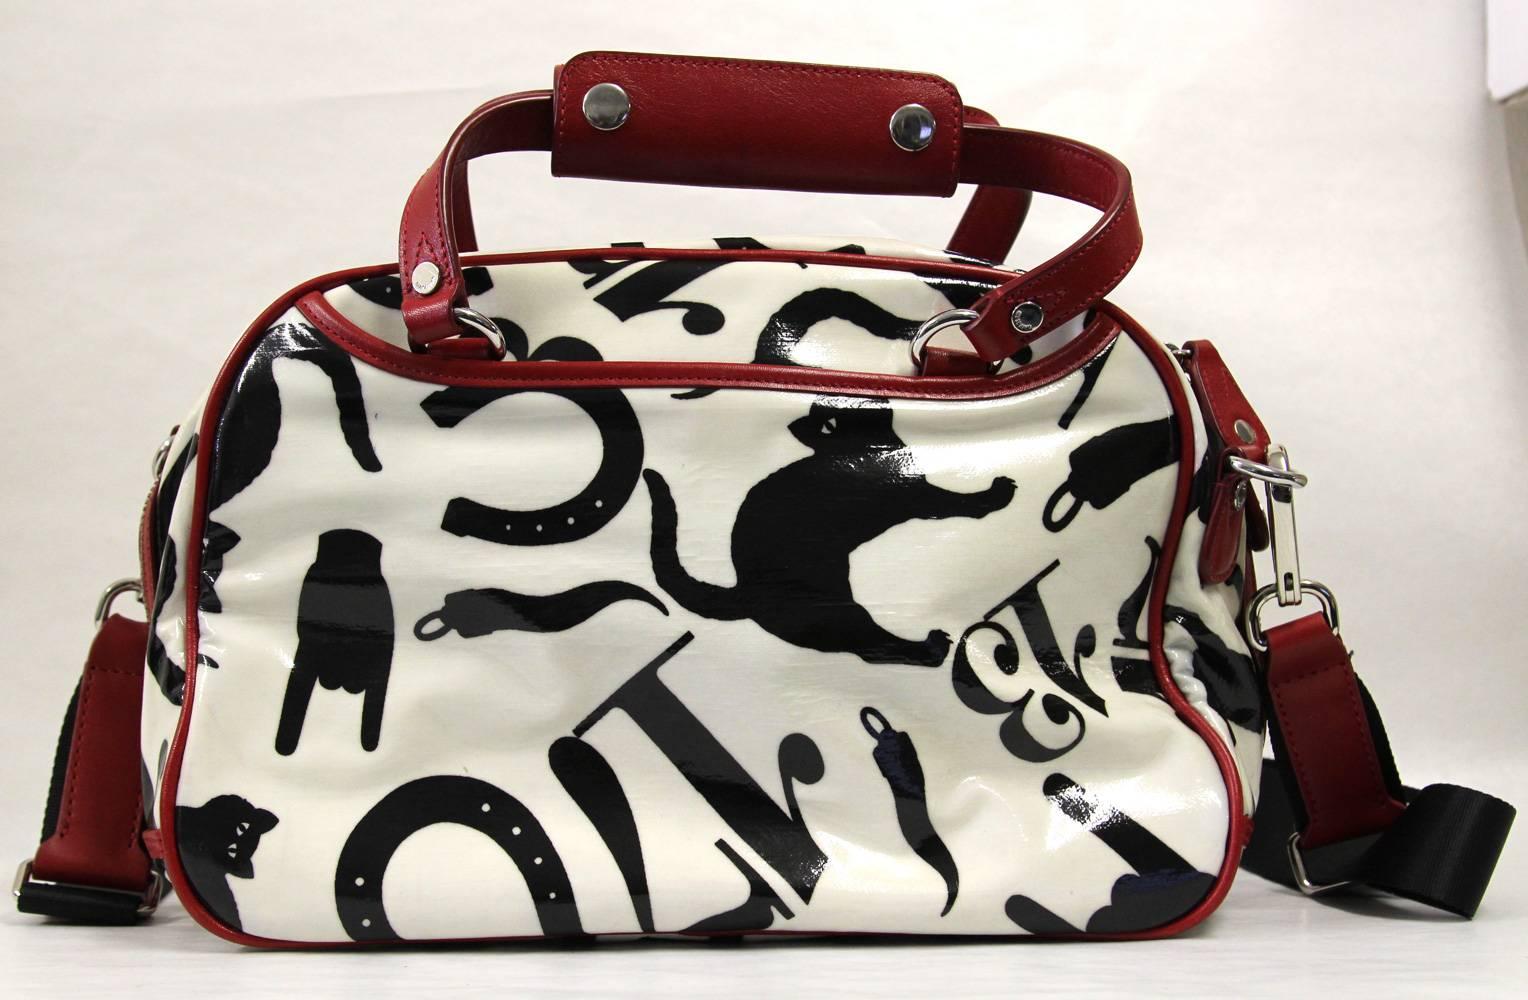 Fun and playful Moschino handbag in white laminated fabric with a print of symbols of superstition and red leather edges. Features a removable strap, zip closure, feet, two outside pockets and two inside pockets. Good conditions.

Measurements:
33